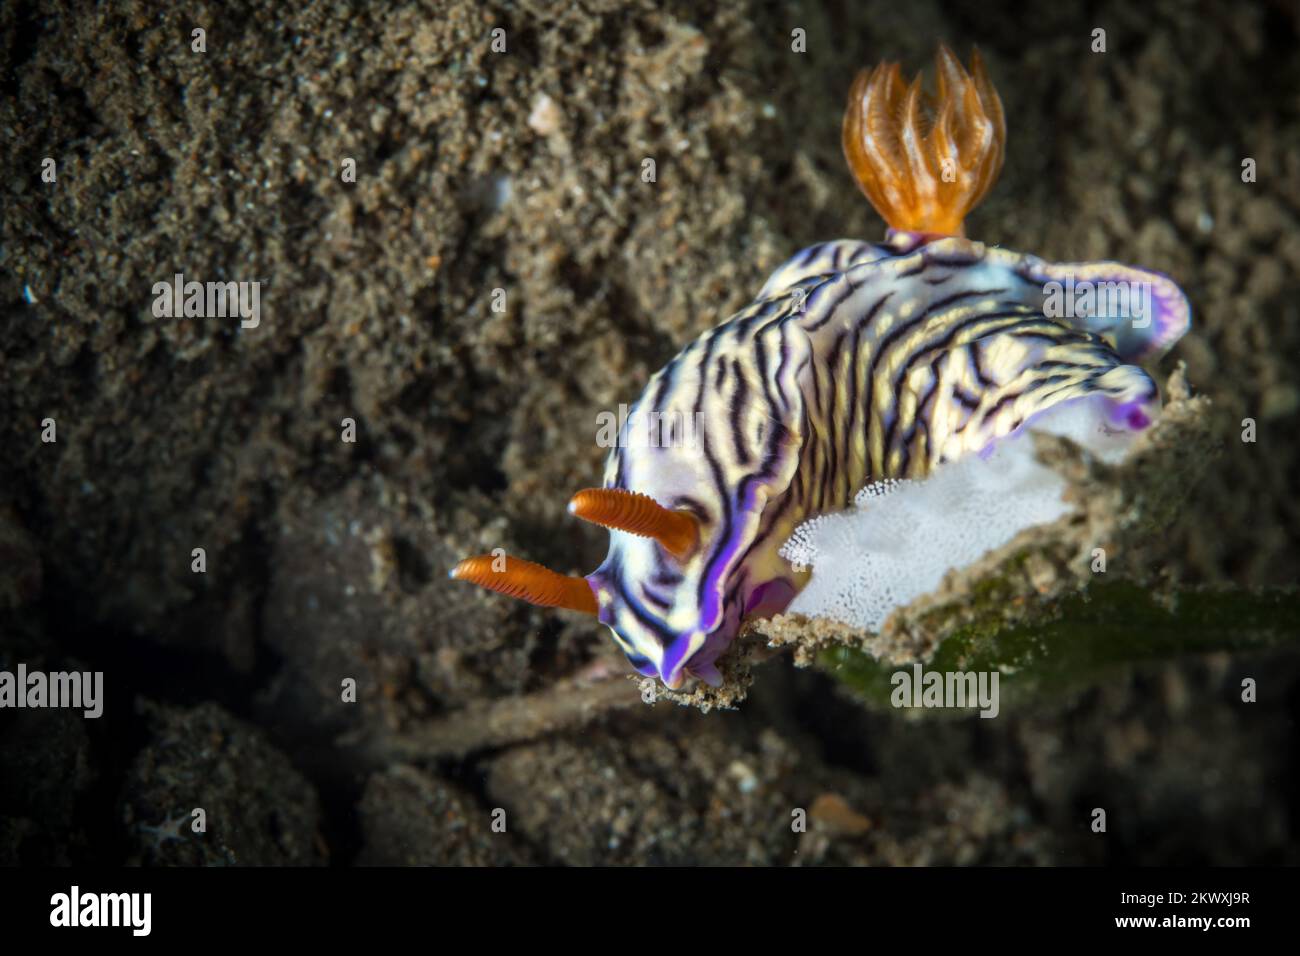 Colorful nudibranch sea slug crawling above coral reef in the Indo Pacific Stock Photo